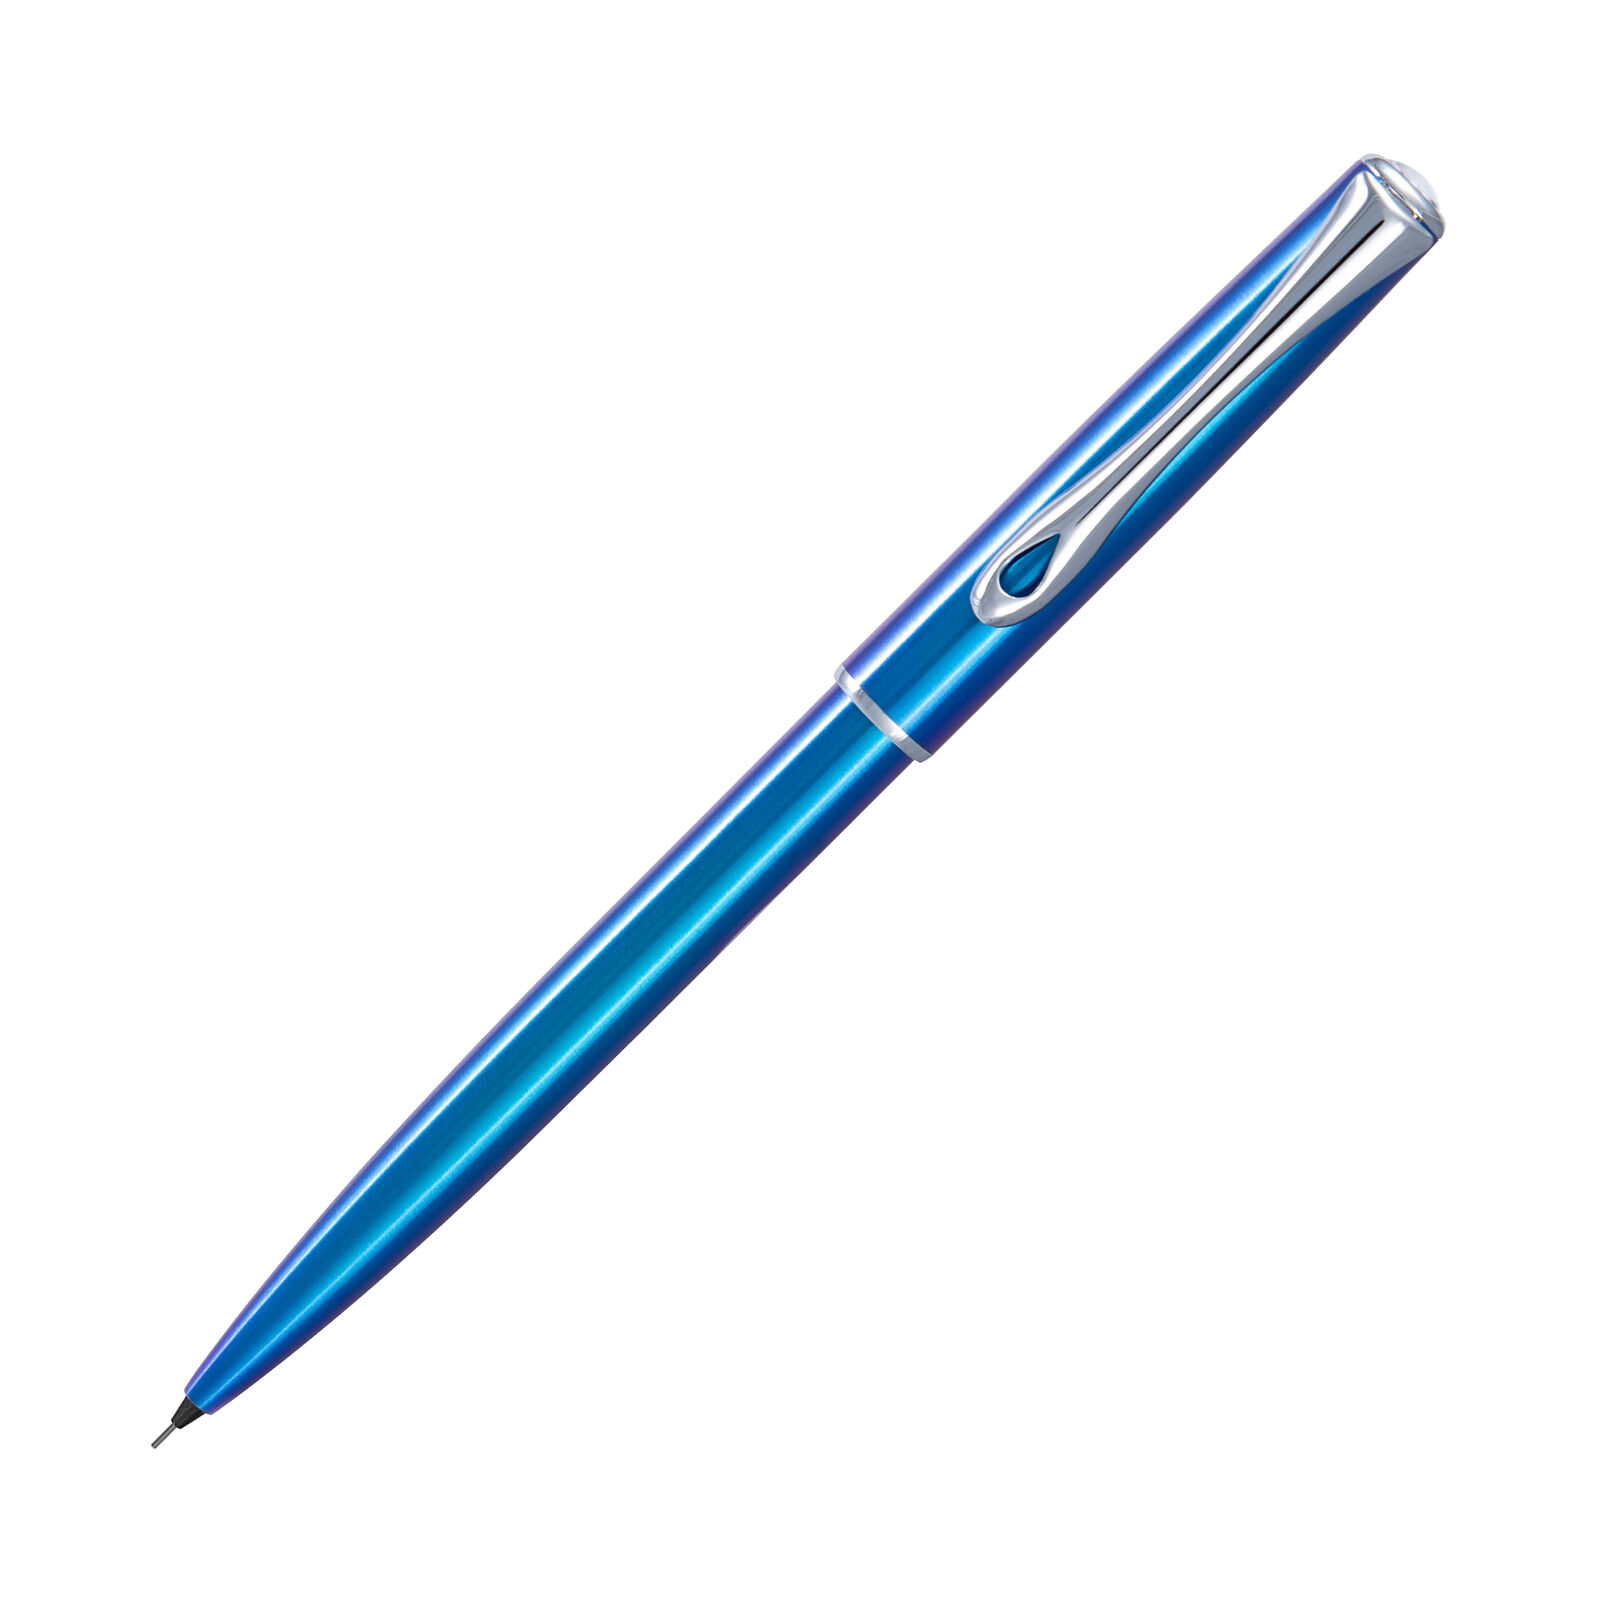 Diplomat Traveller Mechanical Pencil in Funky Blue - 0.5mm - NEW in Box